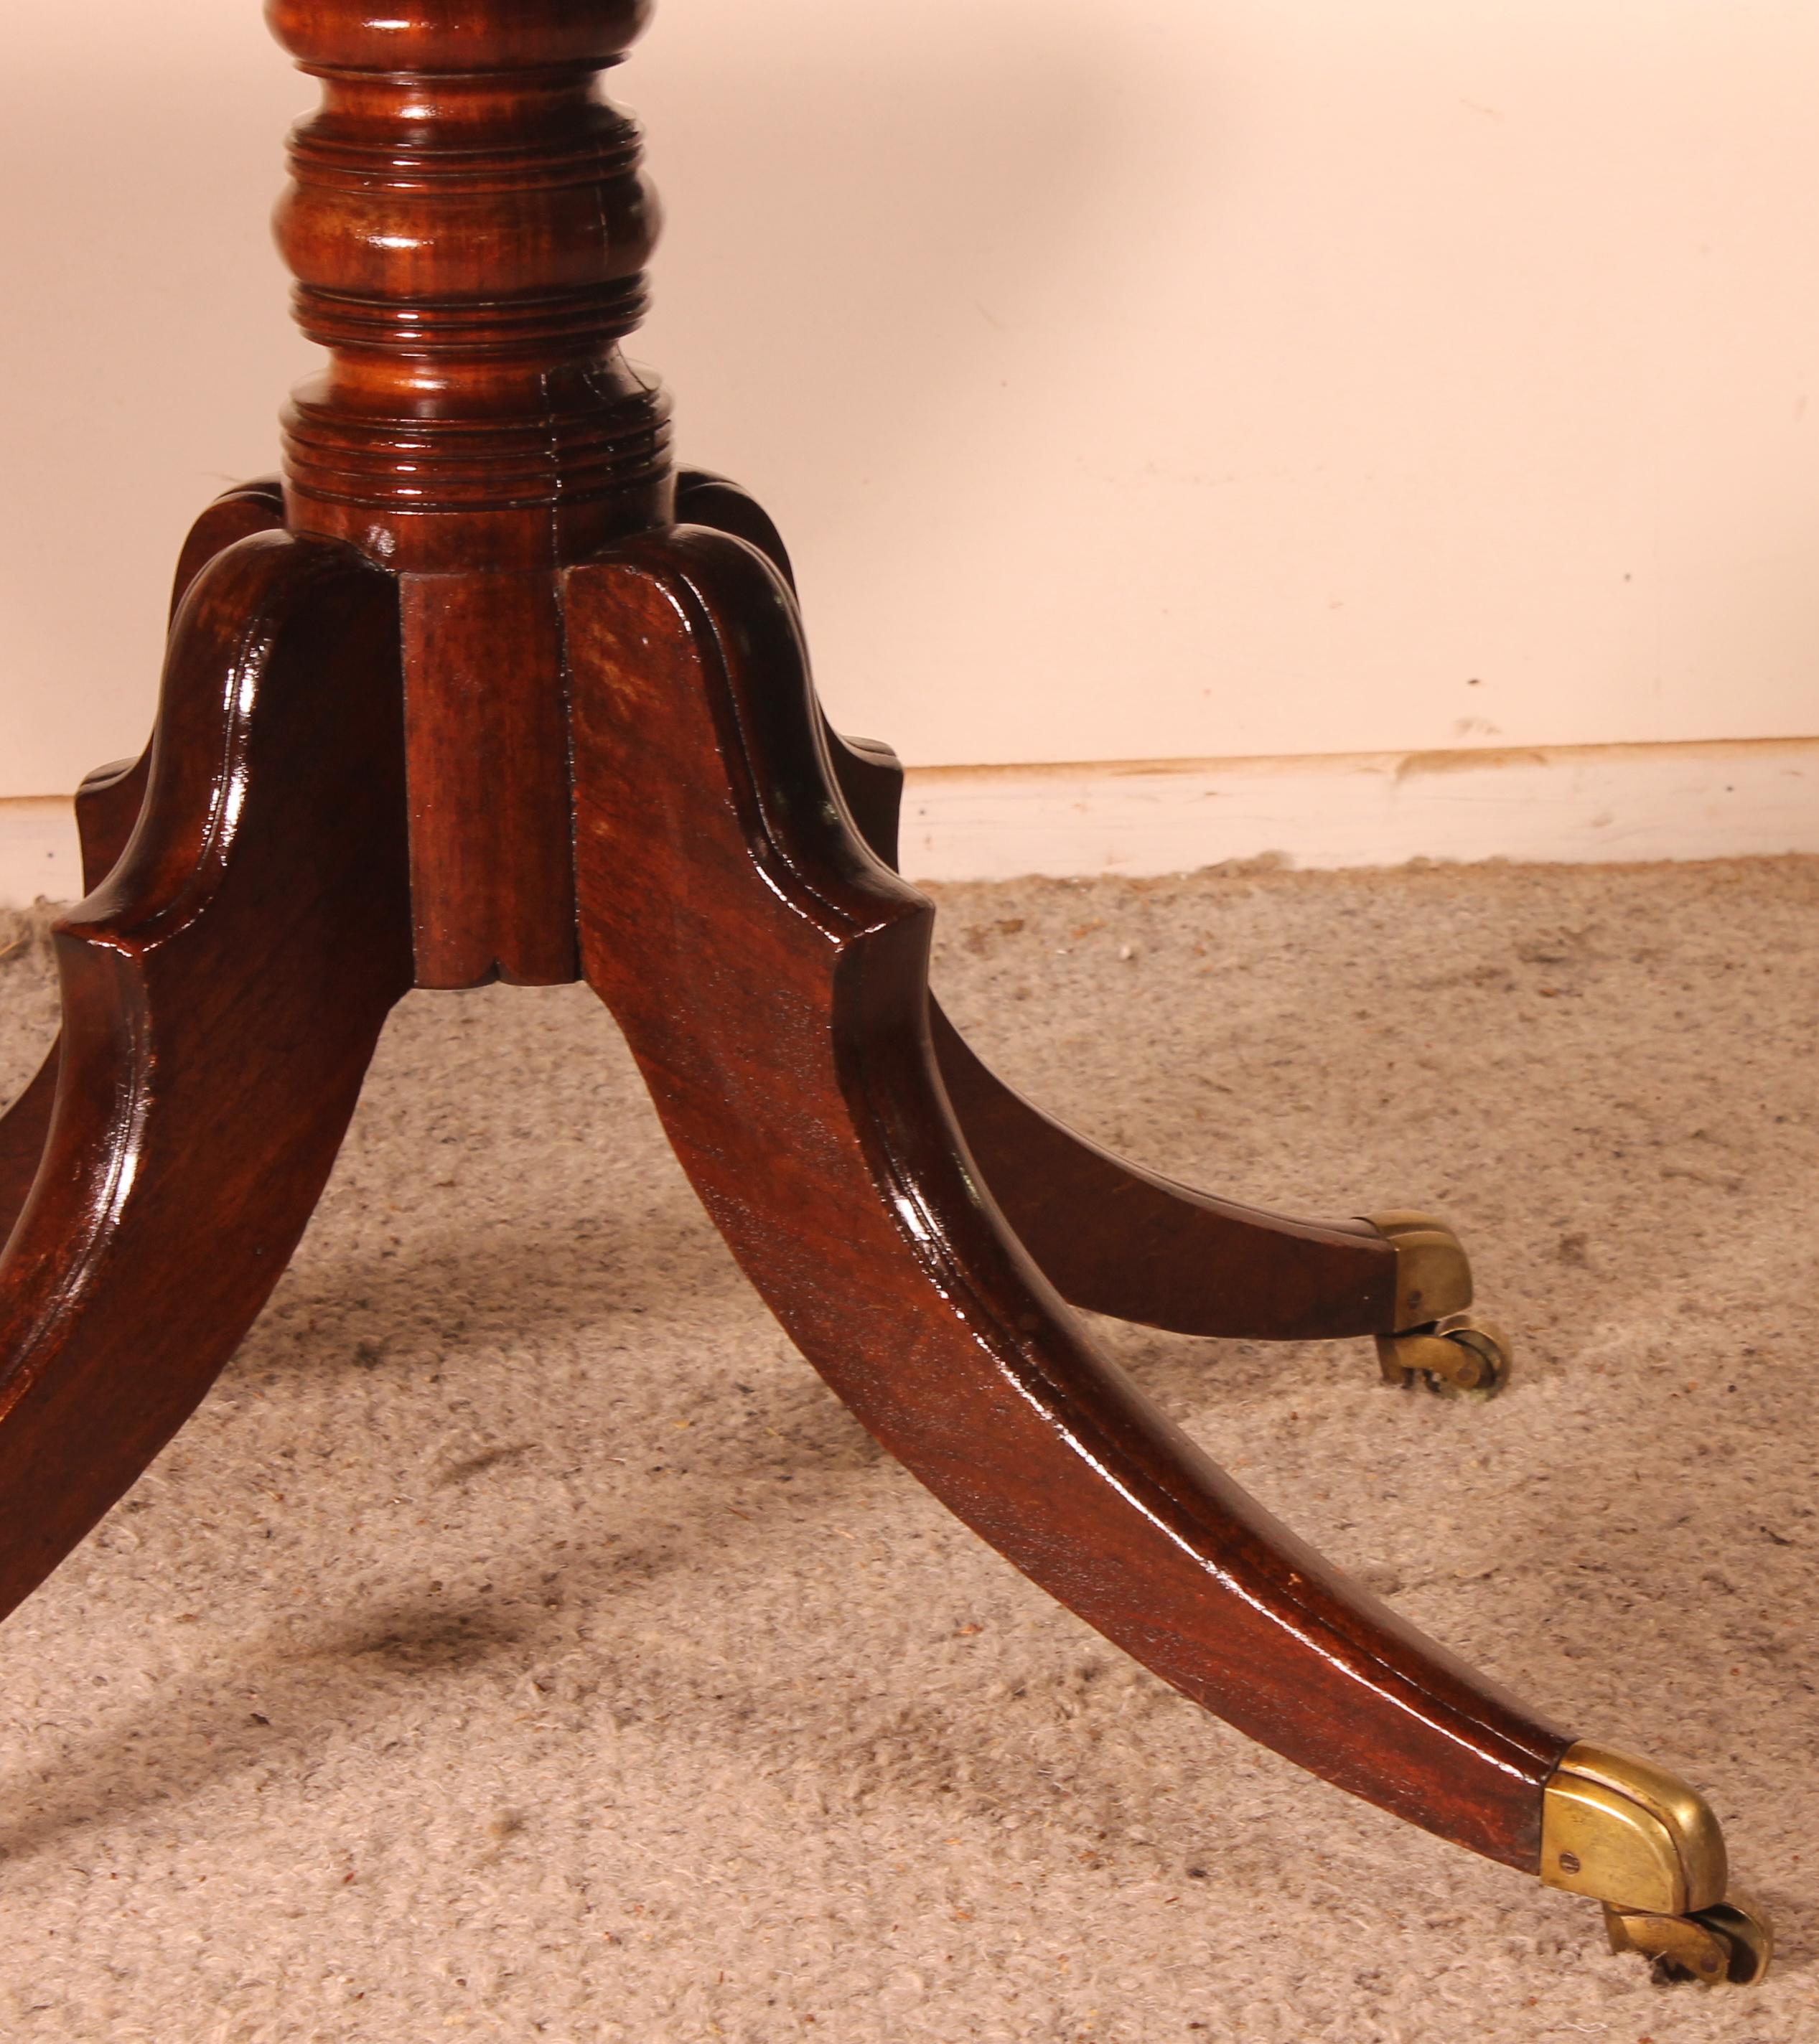 Regency Régency Period Table in Solid Mahogany Circa 1800 For Sale